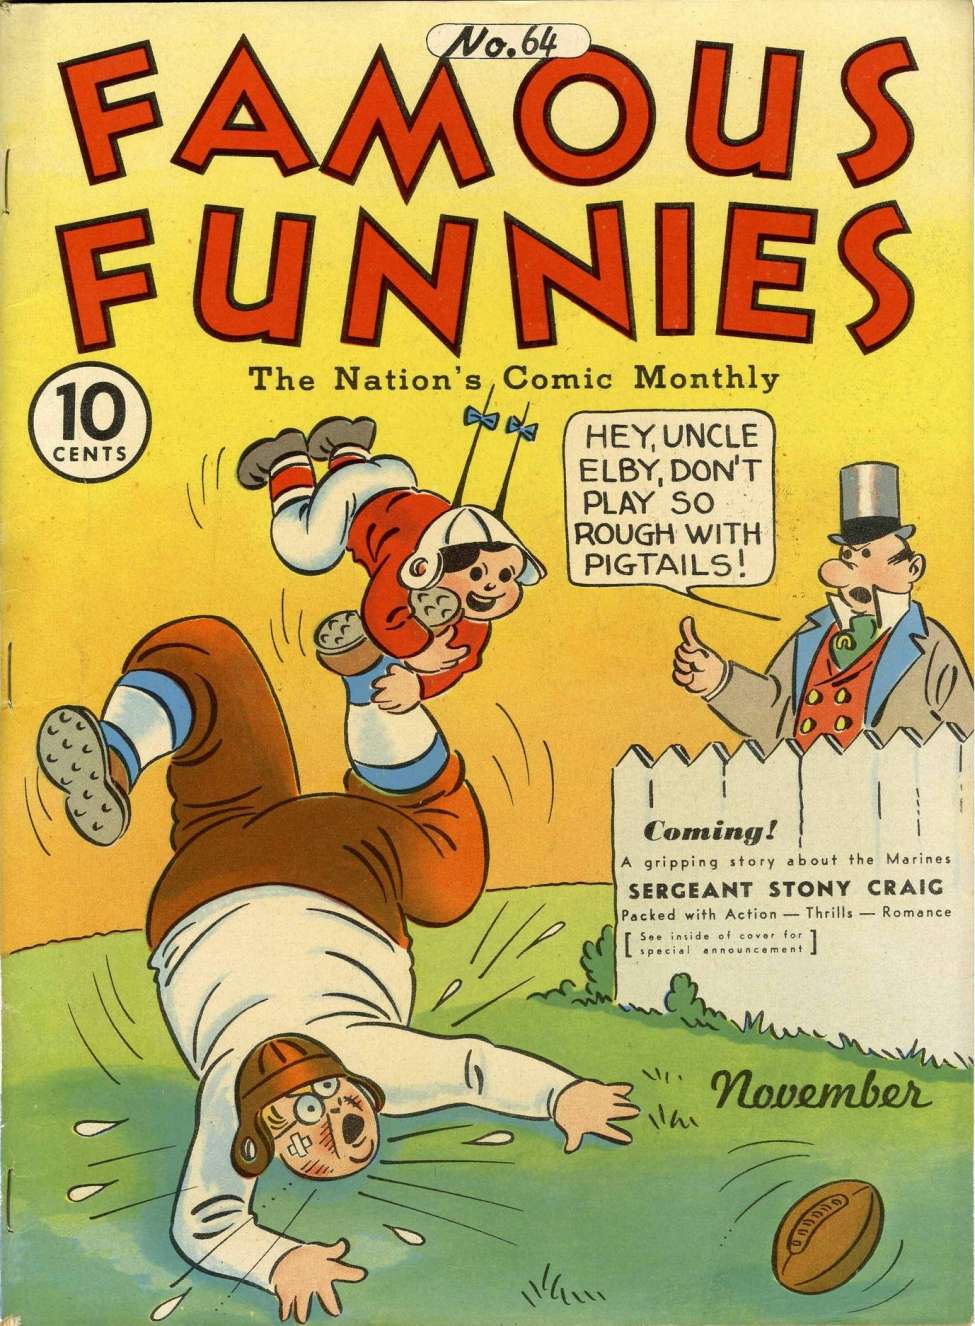 Book Cover For Famous Funnies 64